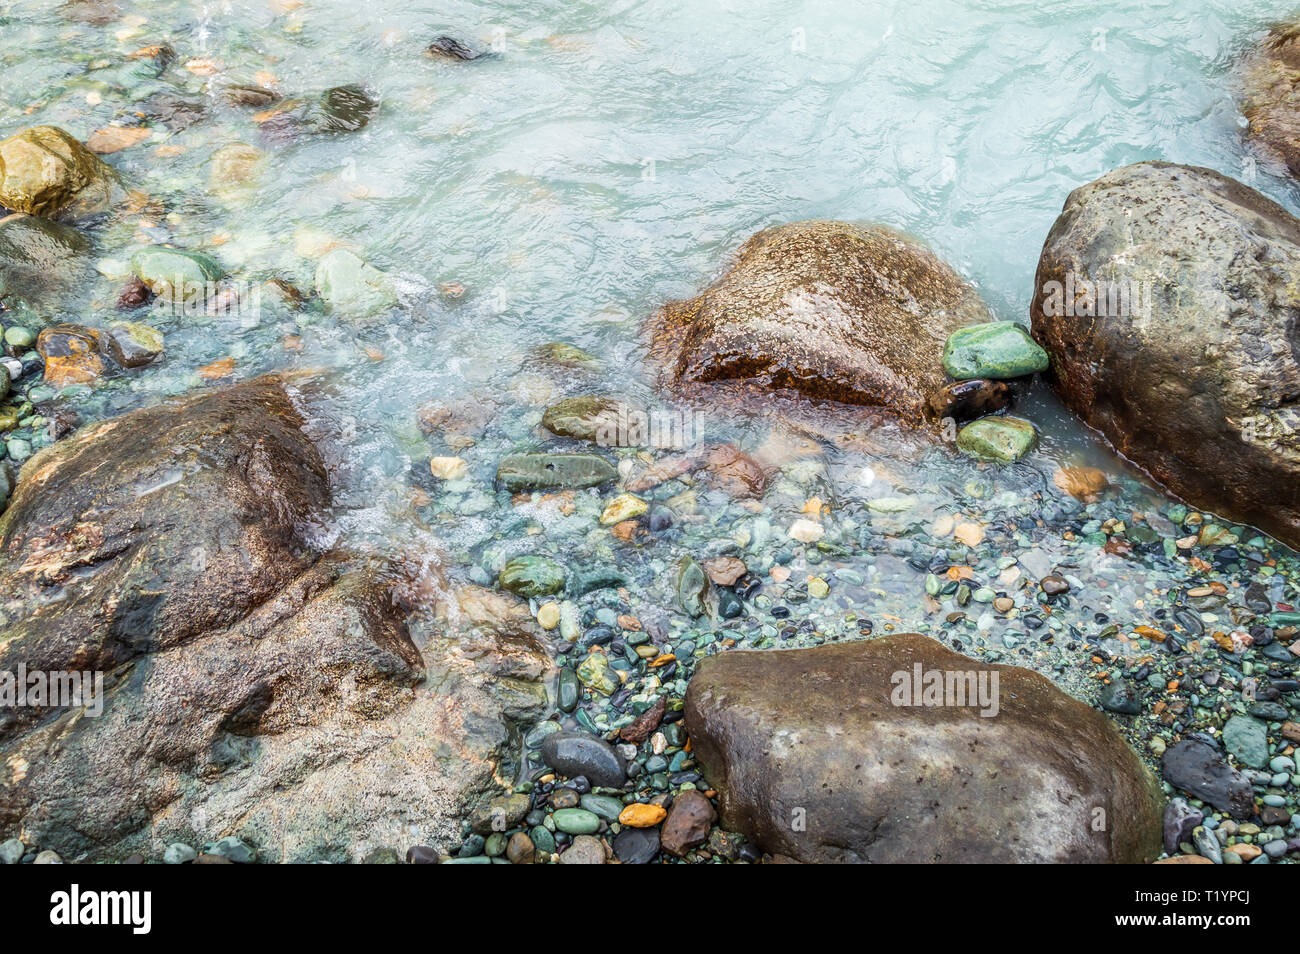 Boulders and pebbles on the bank of a river with milky green colour water Stock Photo